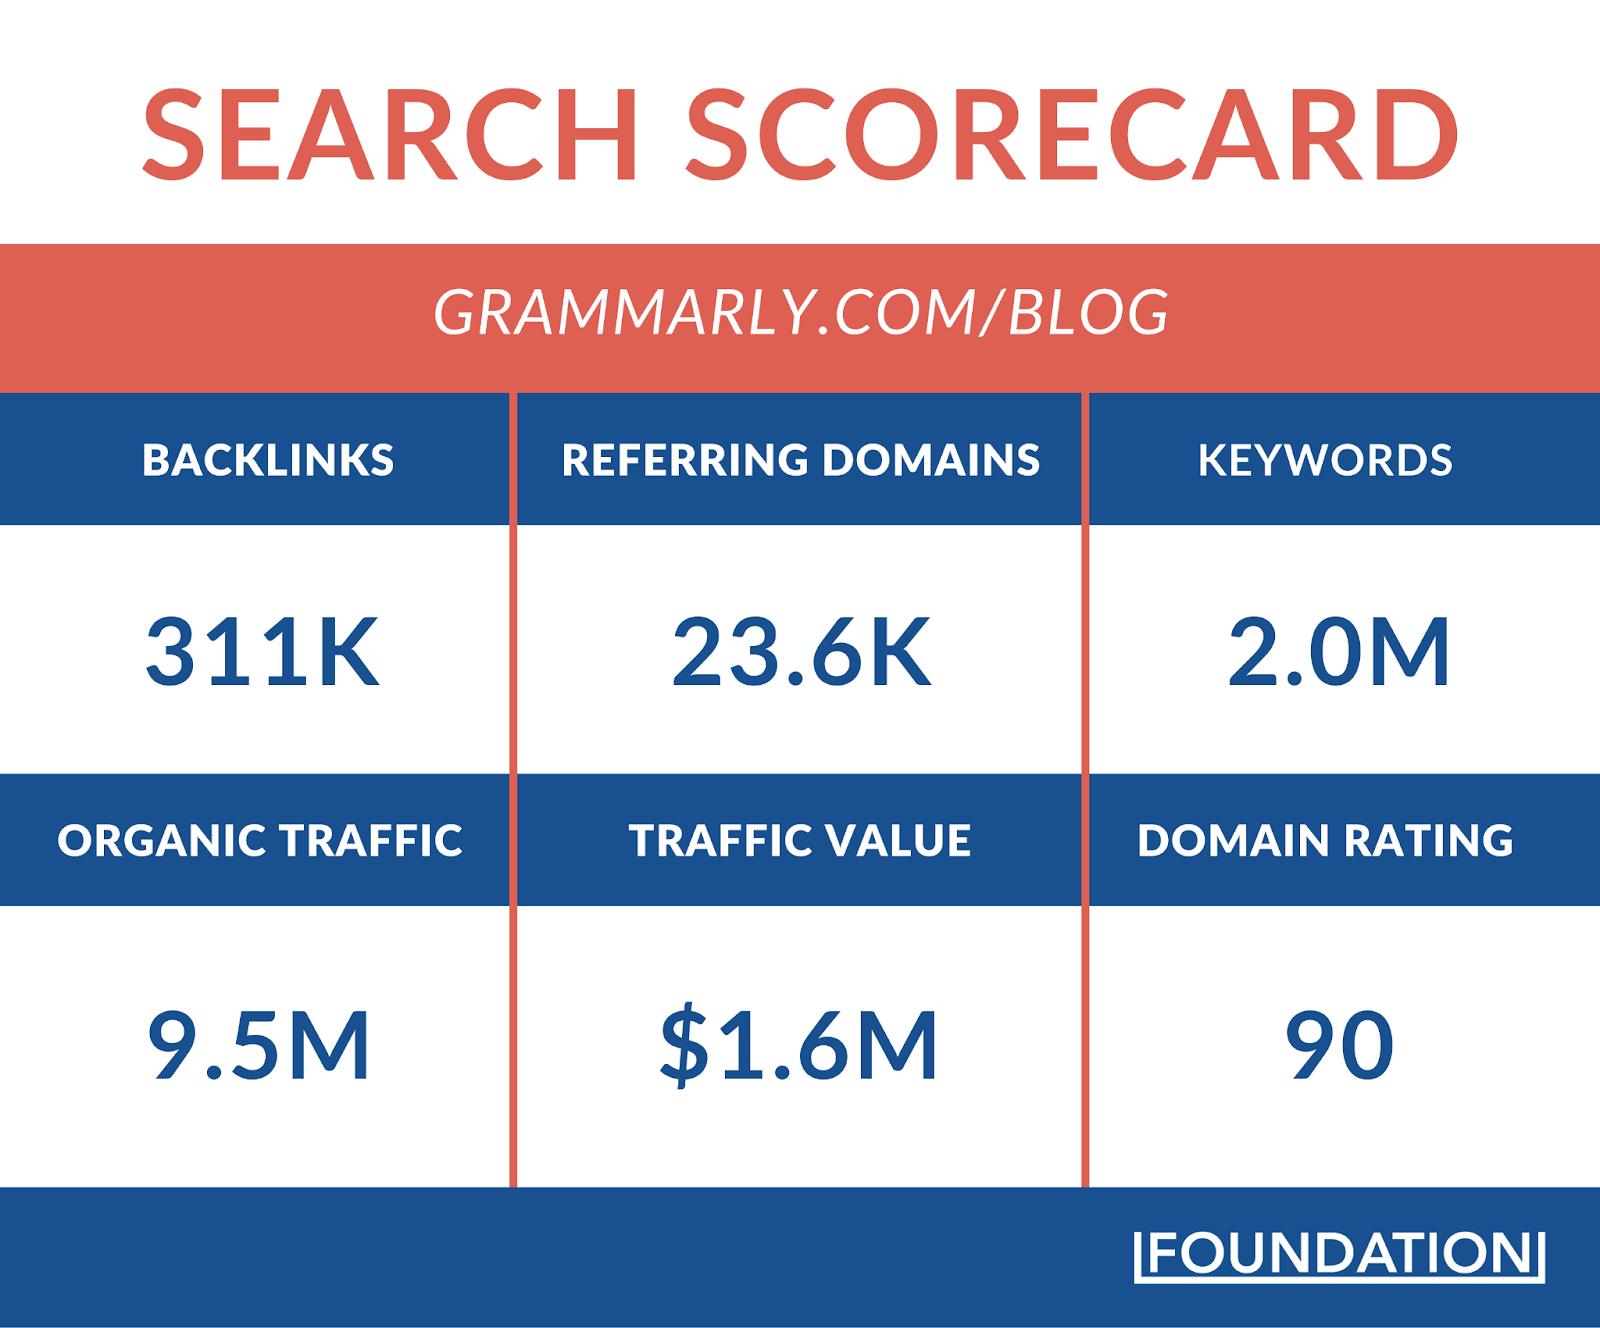 Number of backlinks, keywords, traffic and other metrics for Grammarly's blog